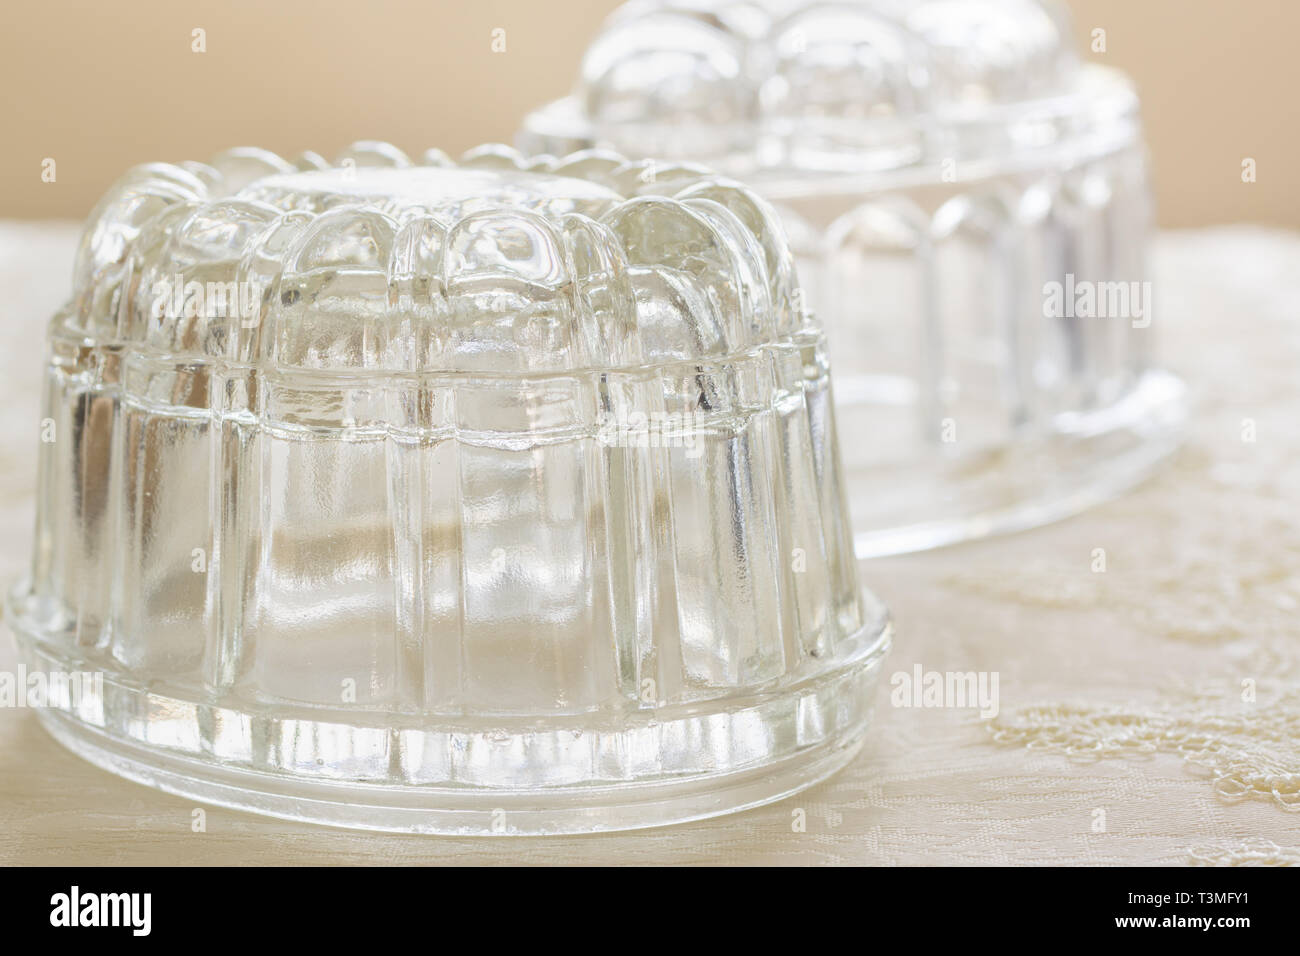 Old fashioned glass jelly or blancmange moulds for making traditional jellies Stock Photo